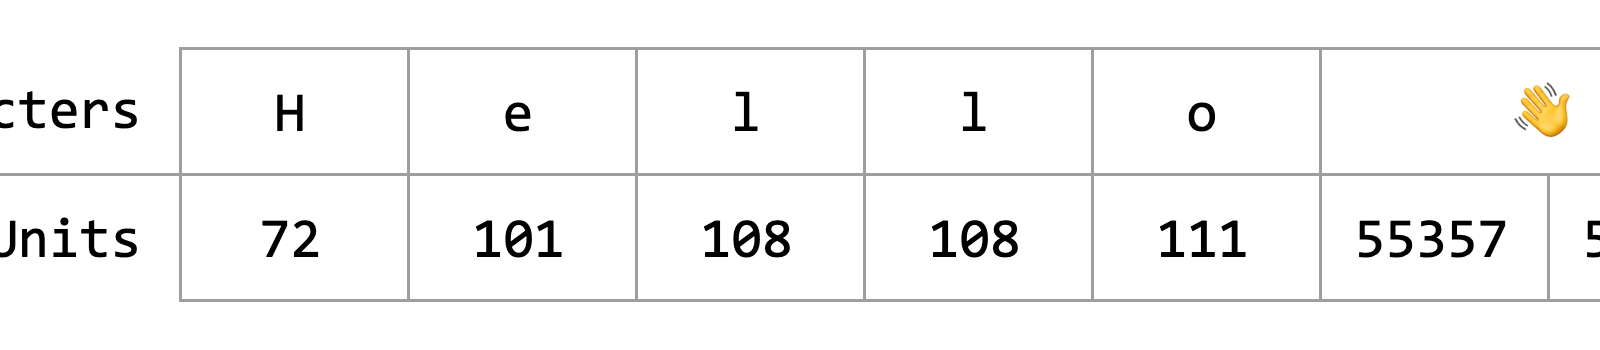 The image shows the string “Hello” with a handwaving emoji at the end and it’s UTF-16 code units. The emoji takes two units.